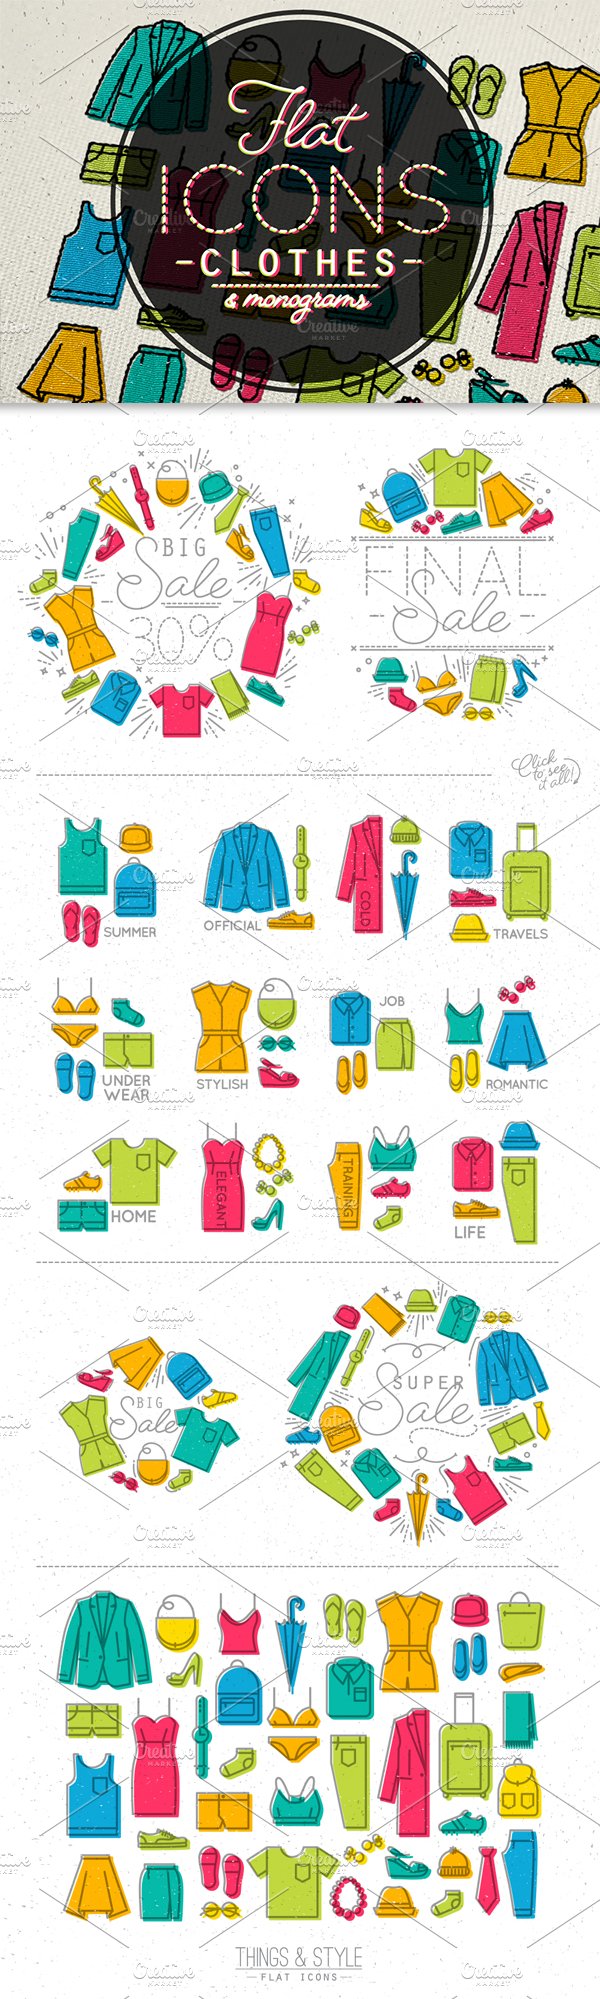 Flat clothes icons cover image.